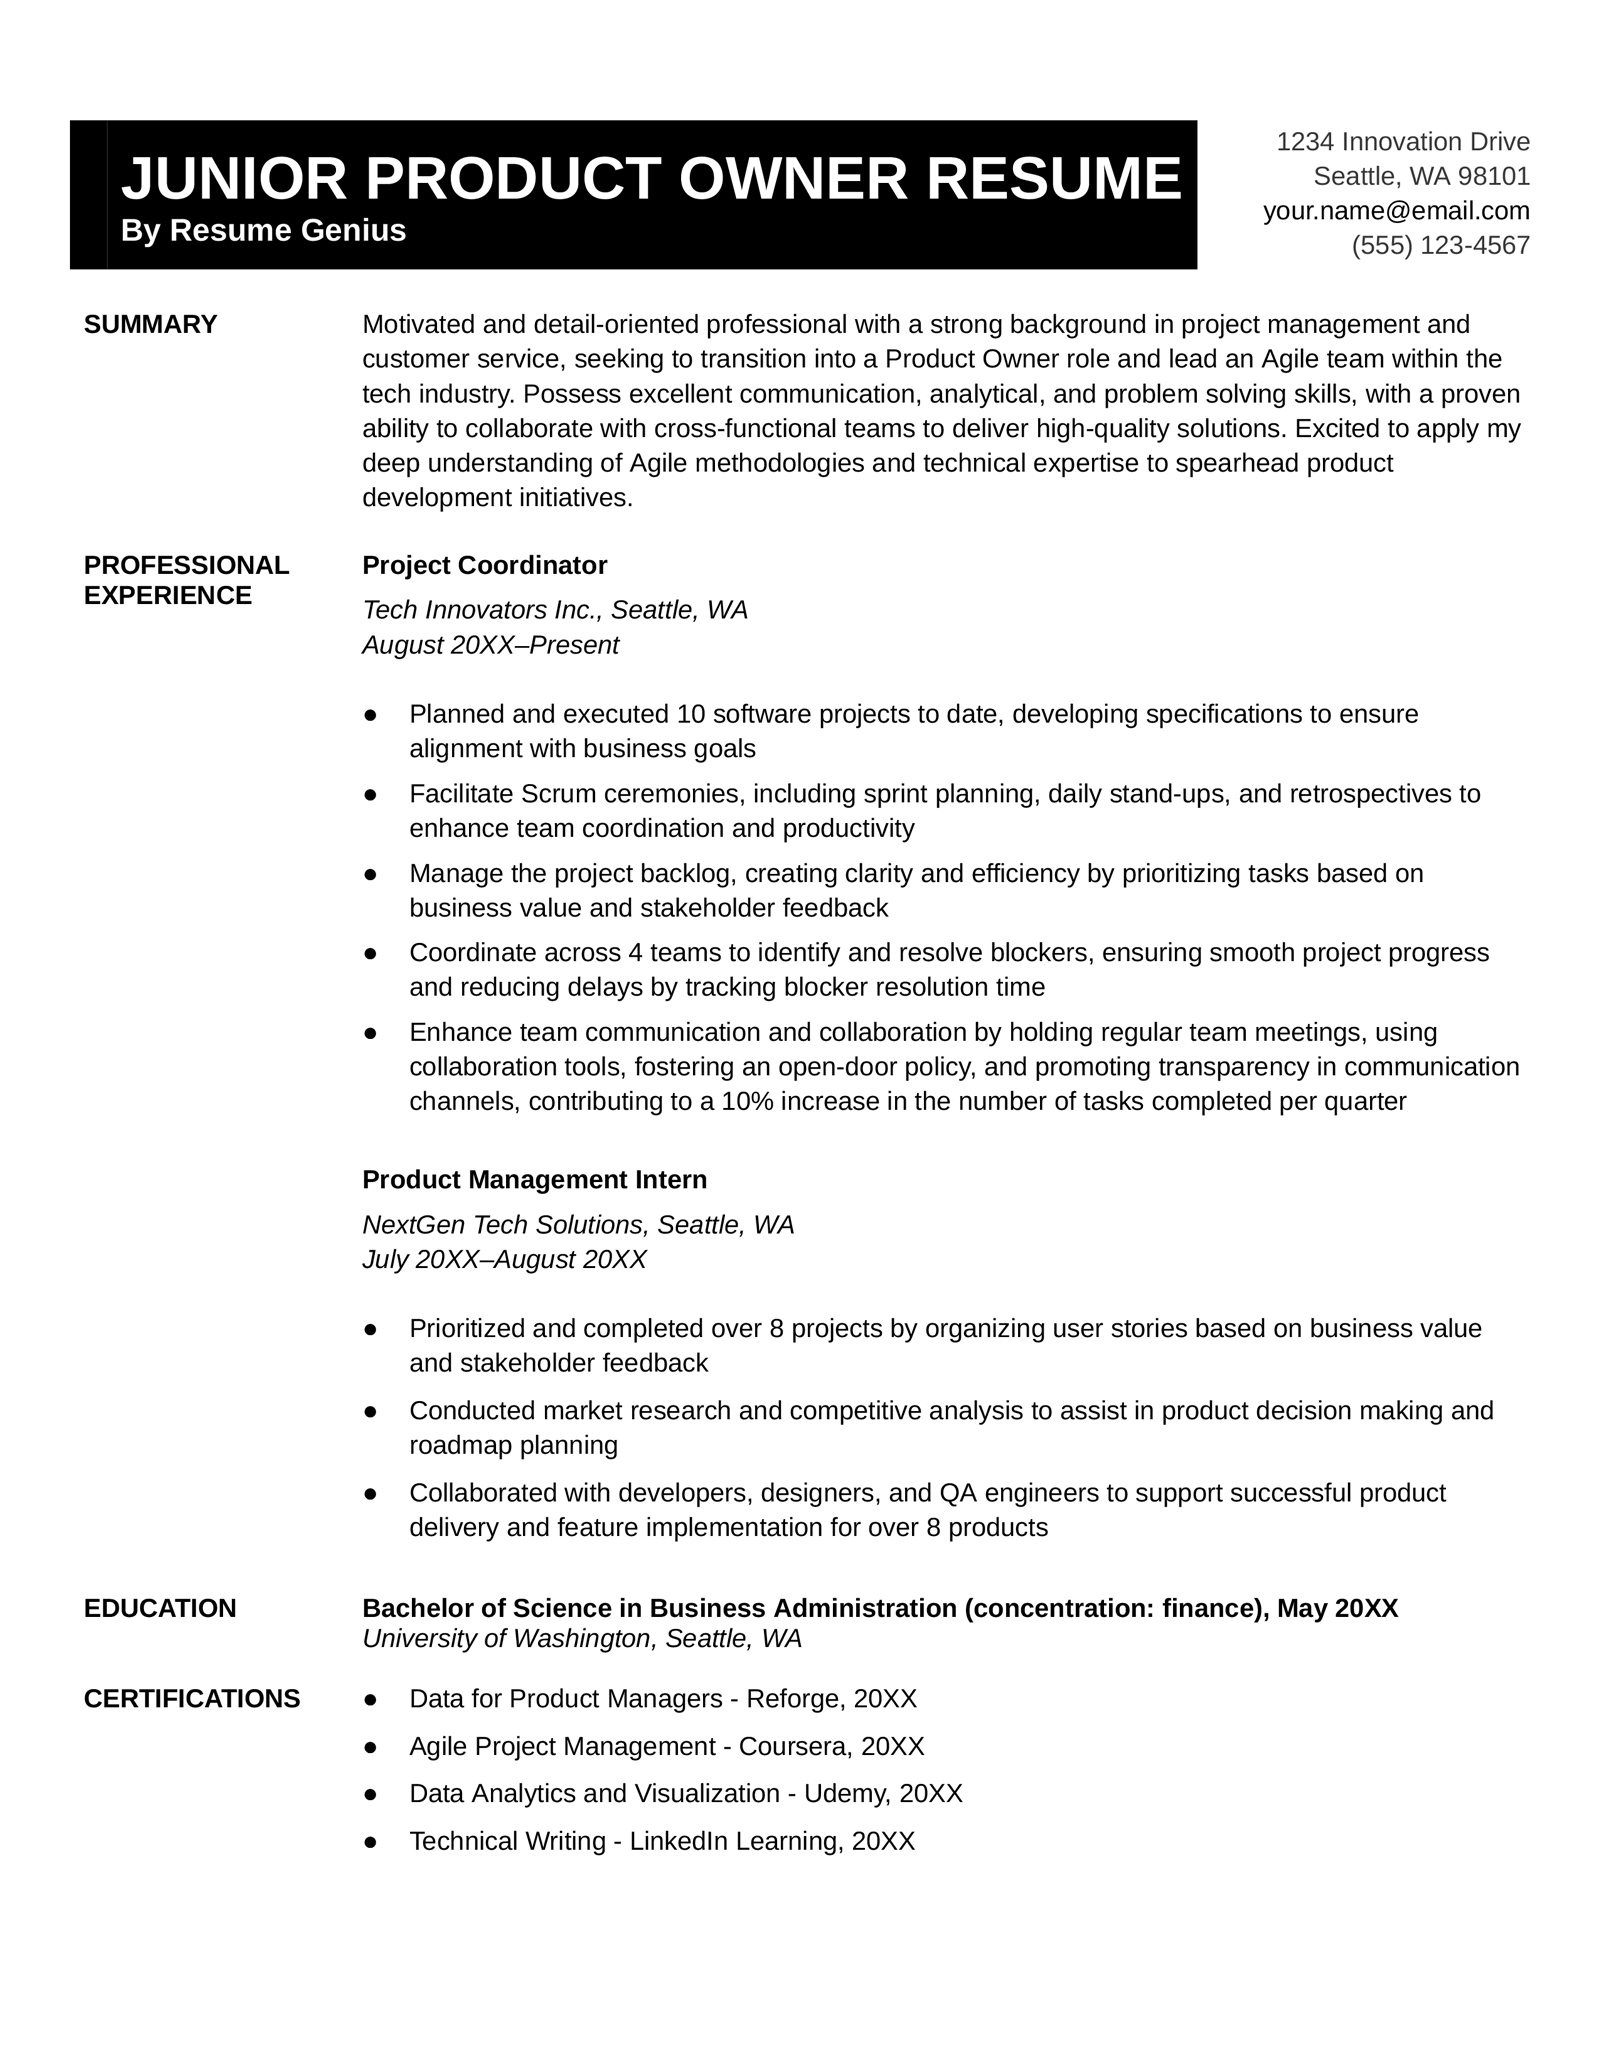 Junior product owner resume sample - tech industry - focus on skills section